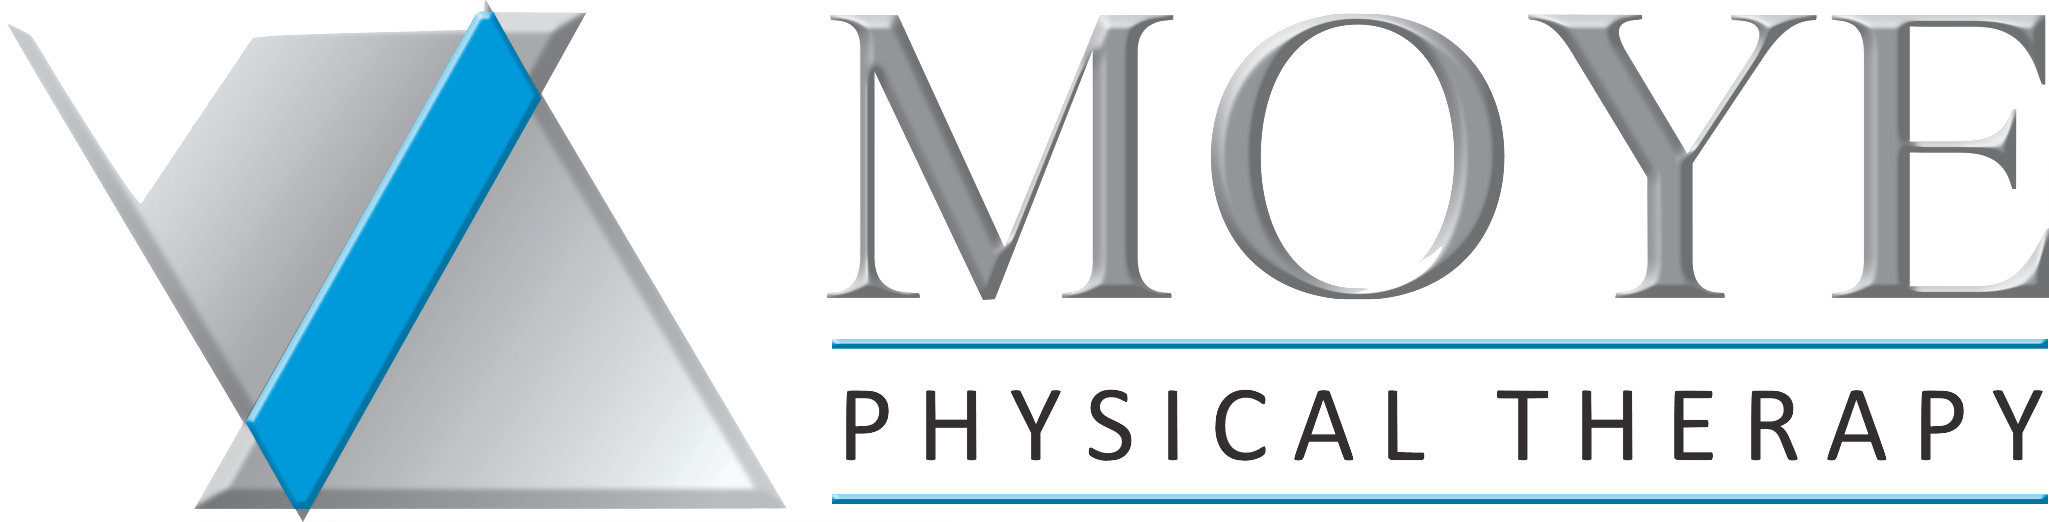 physical therapy southaven ms